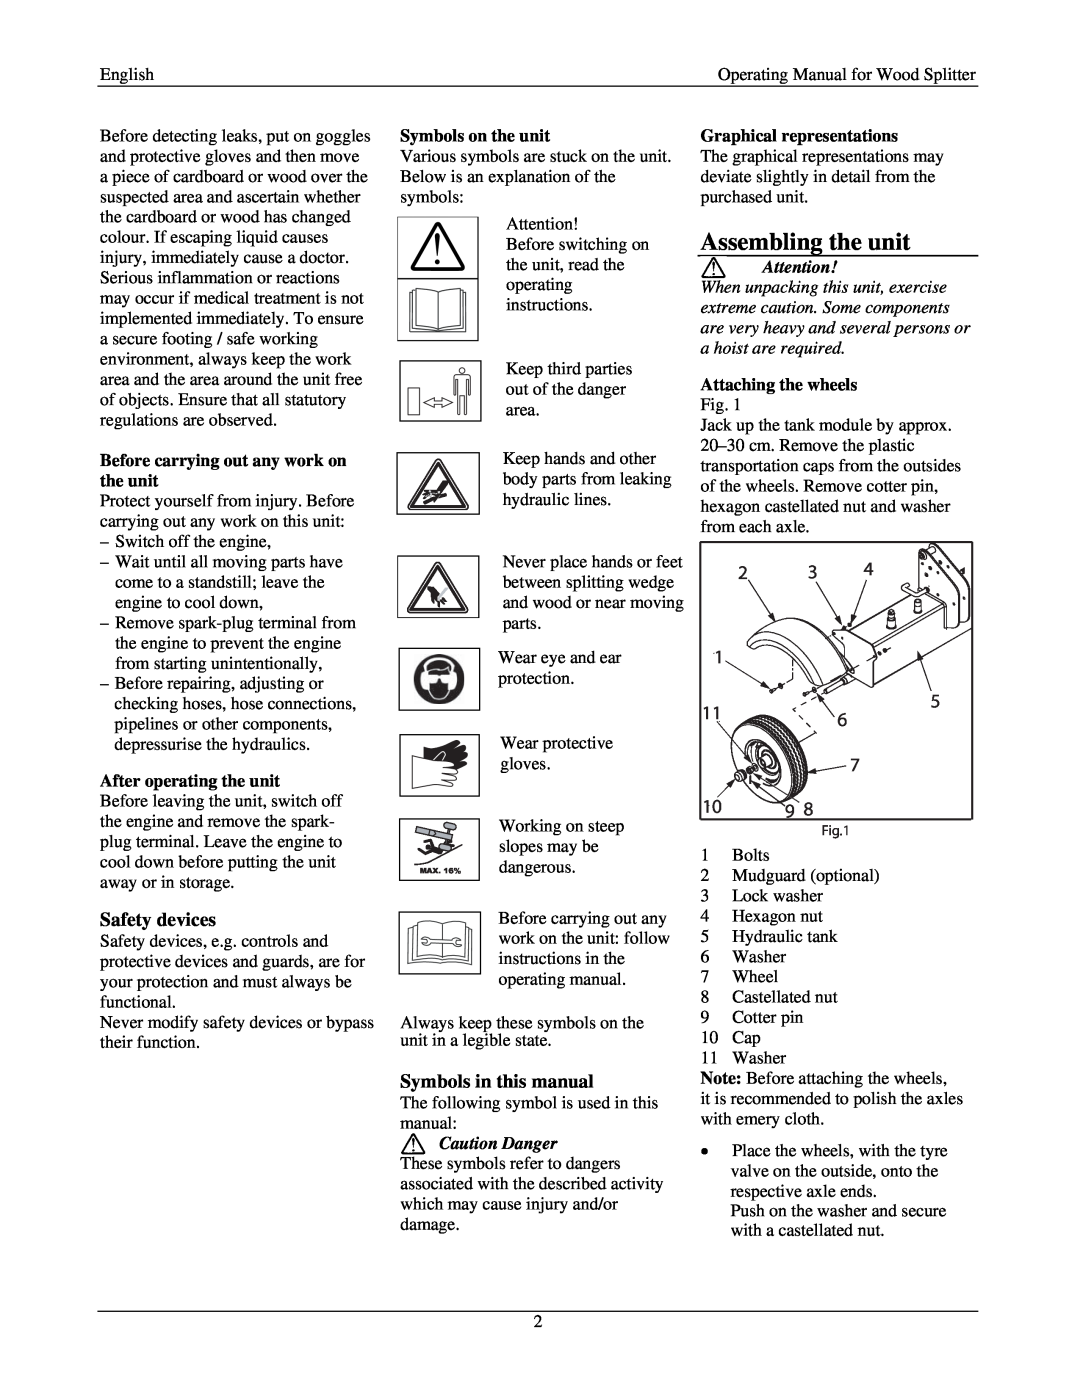 MTD Wood Splitter Assembling the unit, Safety devices, Symbols in this manual, Symbols on the unit, Attaching the wheels 